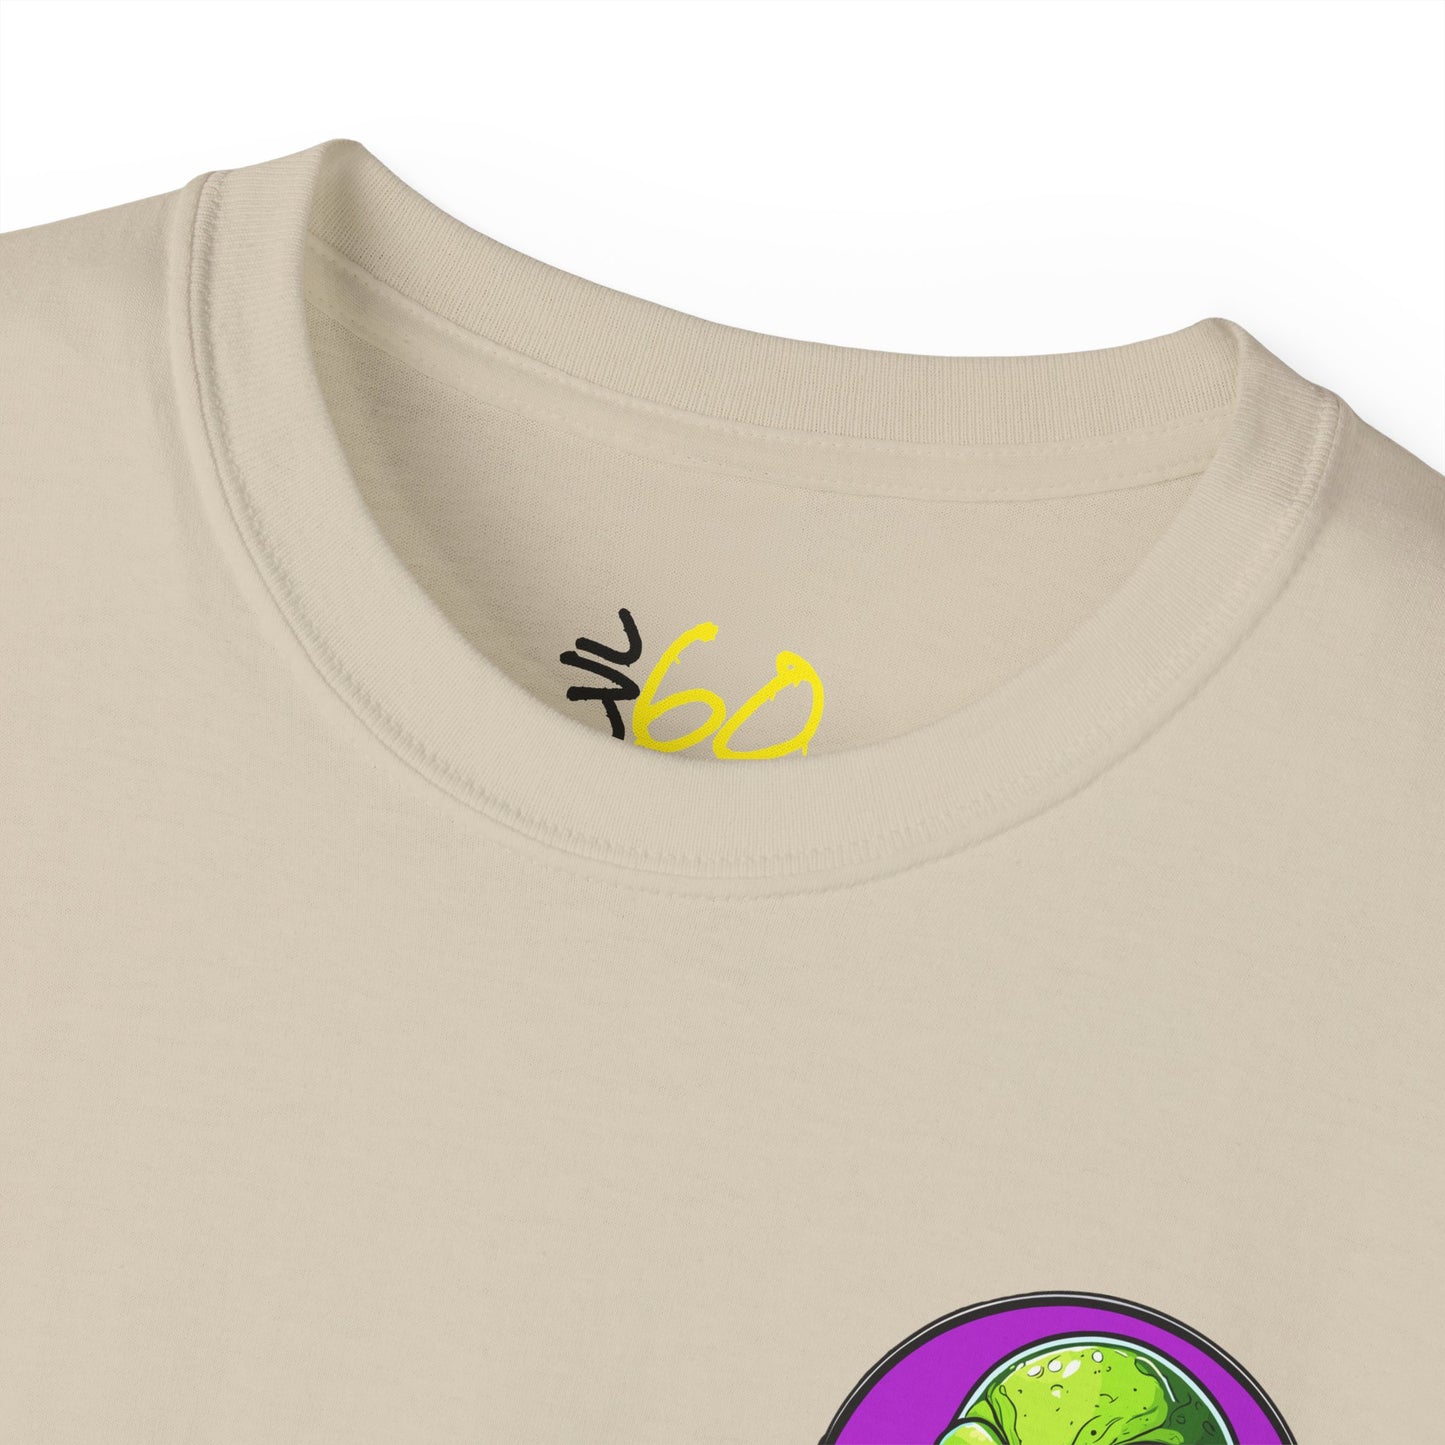 Graphic Tee: Space Dude